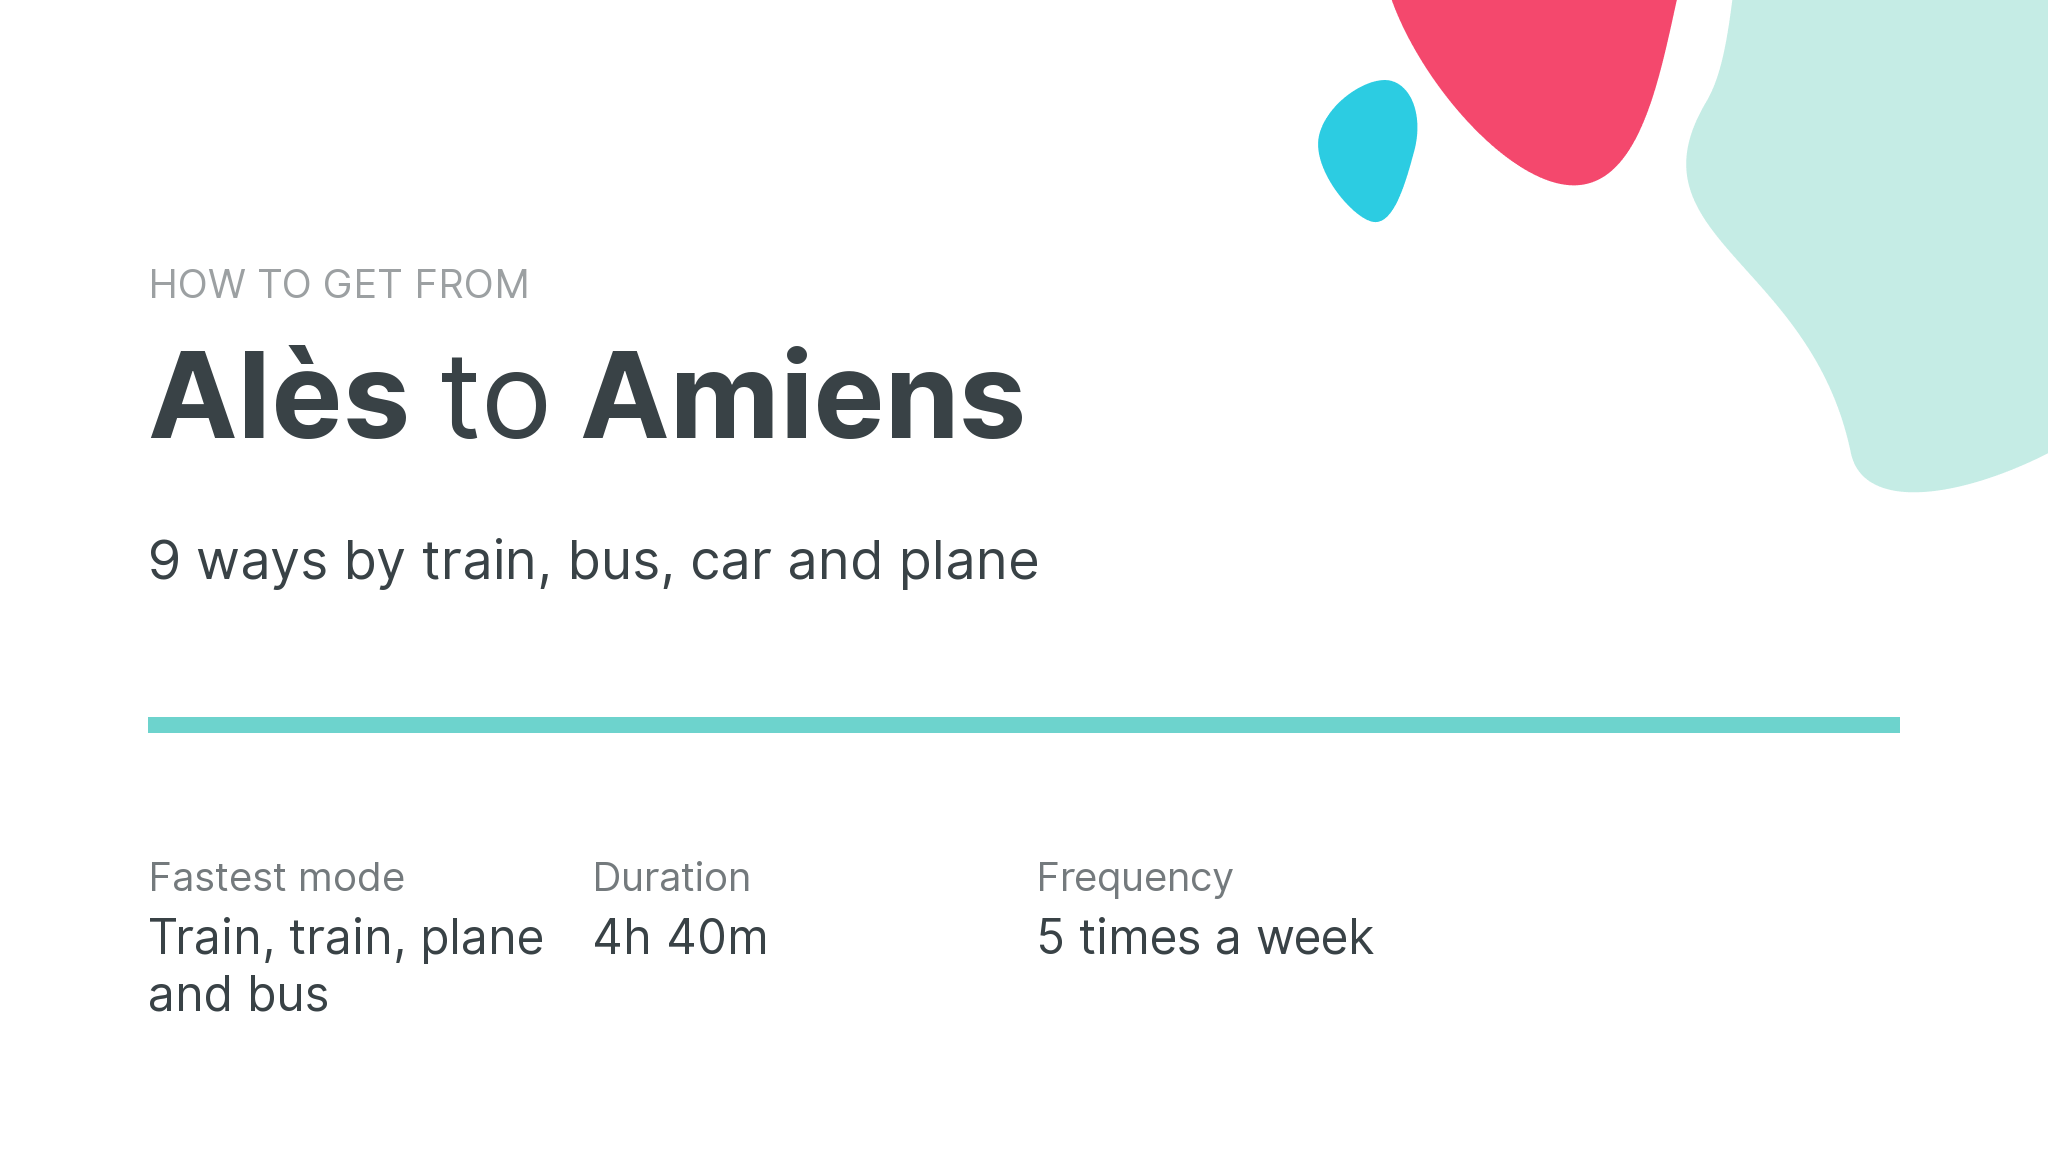 How do I get from Alès to Amiens